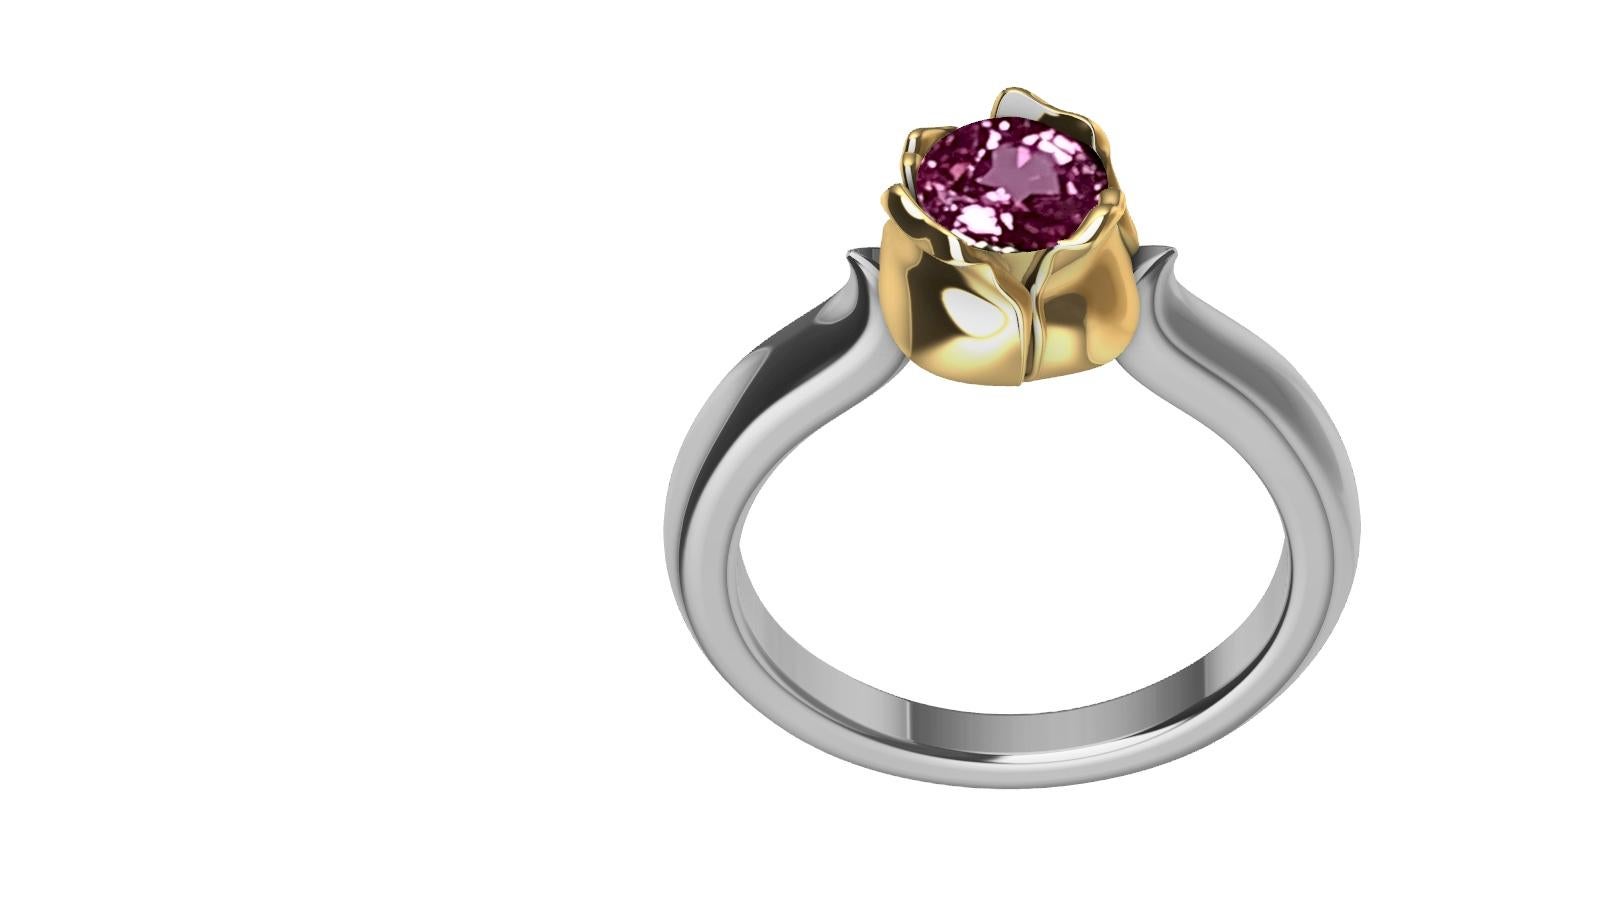 For Sale:  18 Karat Yellow Gold and Platinum Ceritfied Pink Sapphire 1.18 Carat Tulip Ring 4